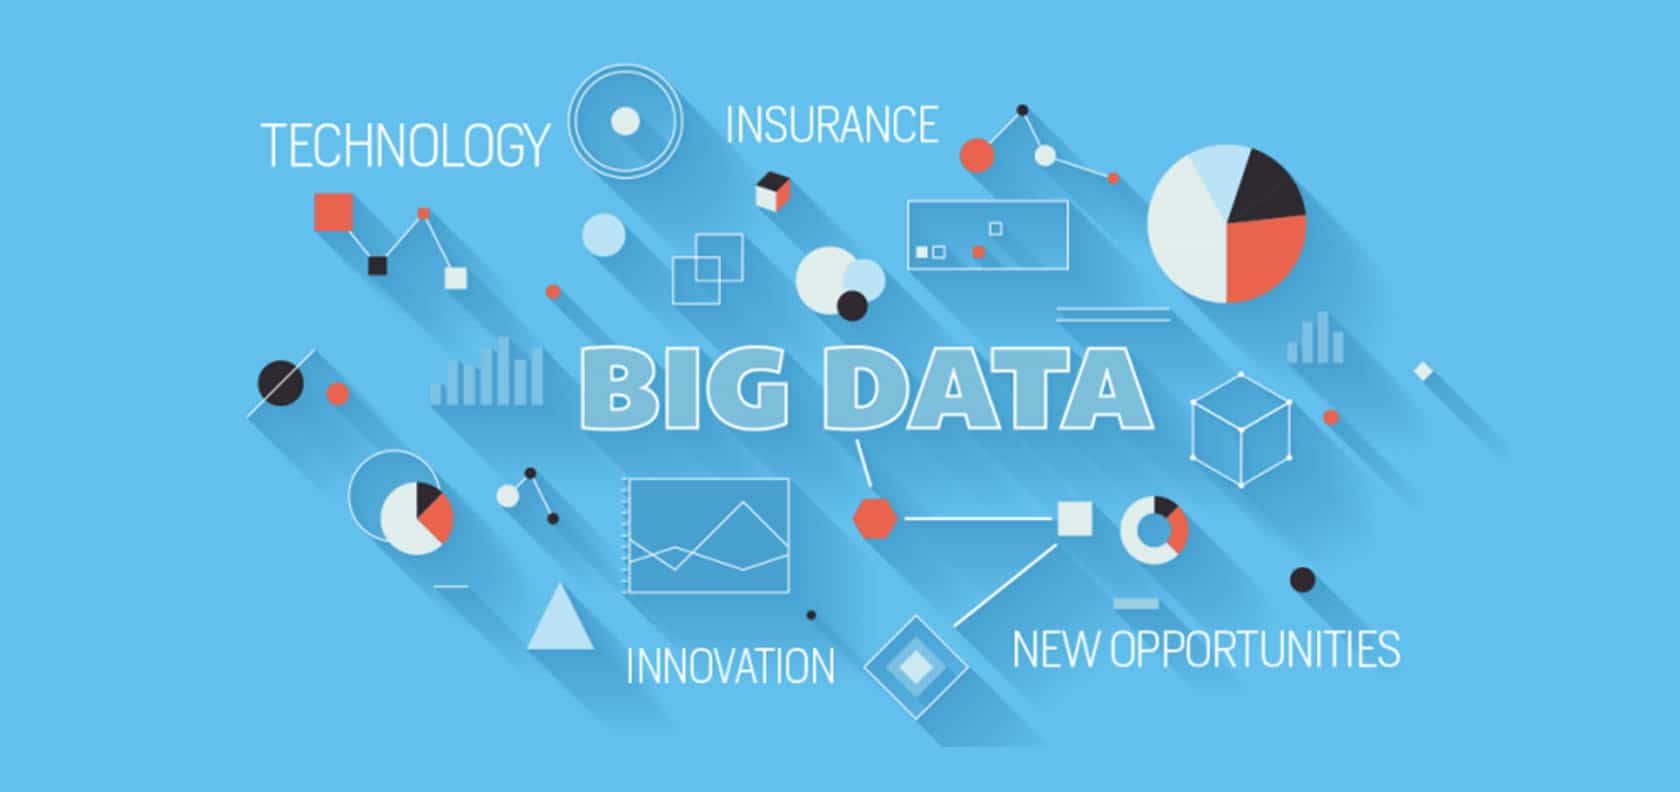 Big data infographics on insurance, technology, new opportunities and innovation.